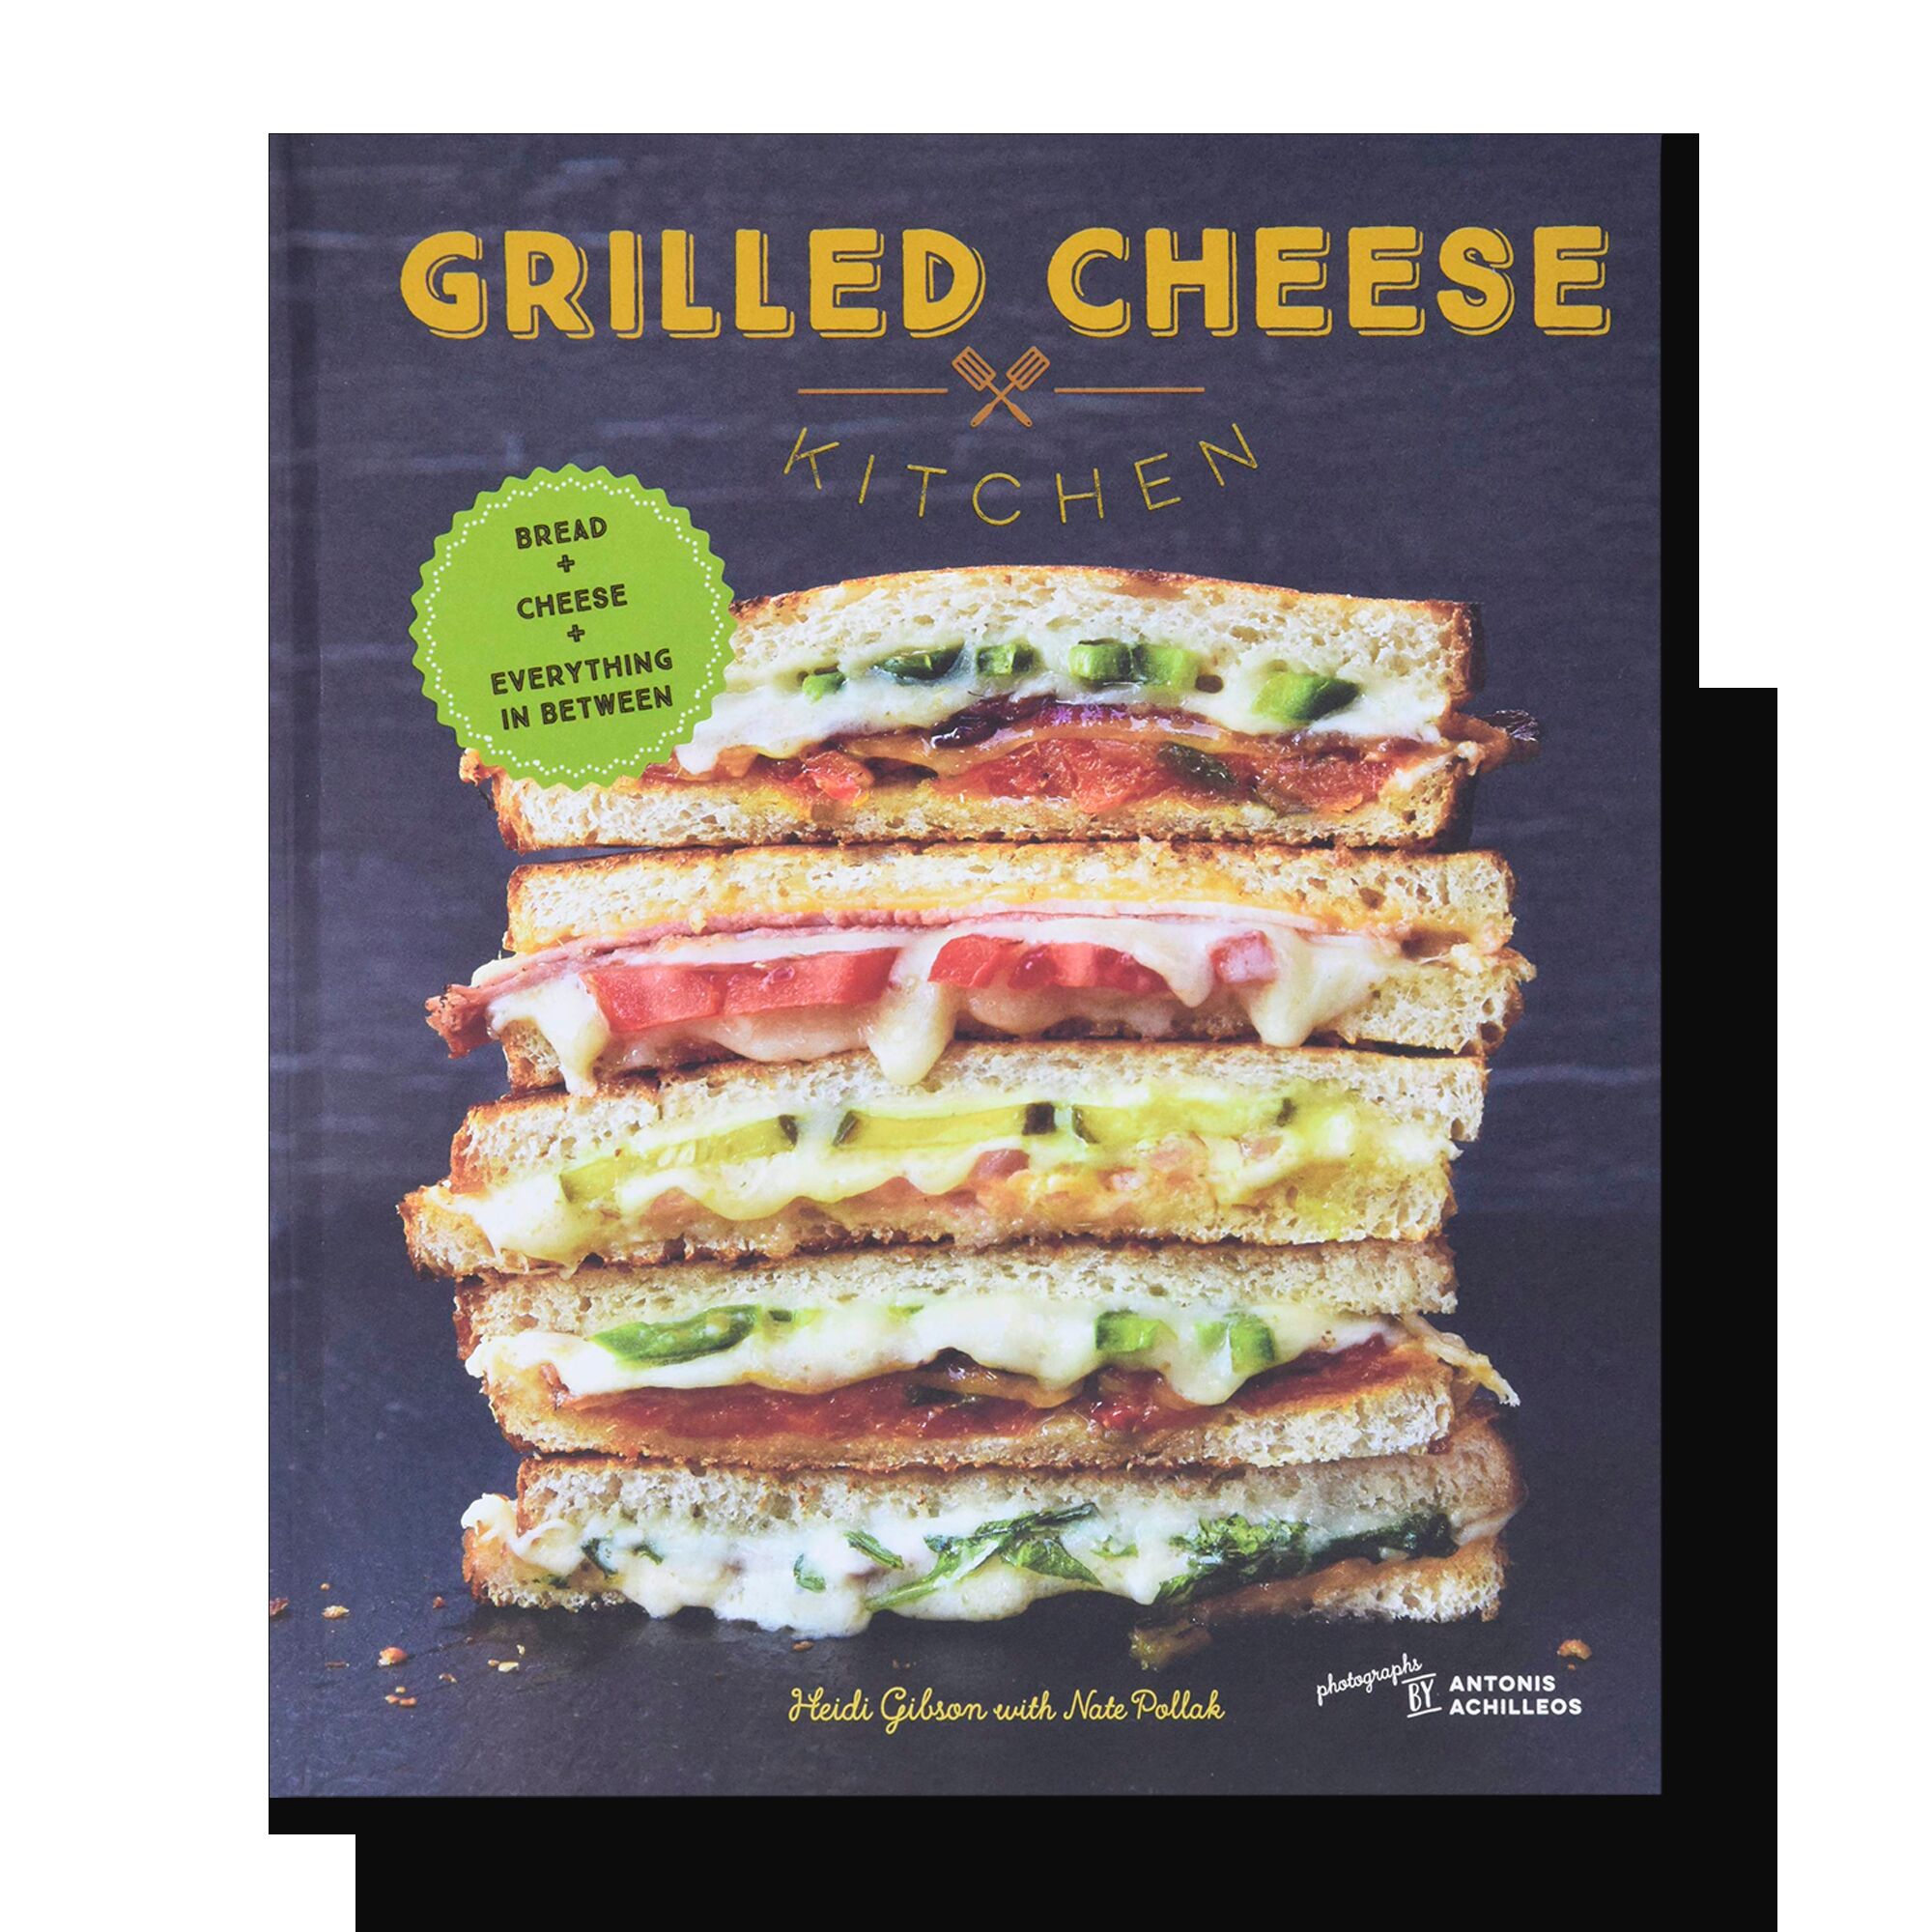 Grilled Cheese Kitchen: Bread + Cheese + Everything in Between 